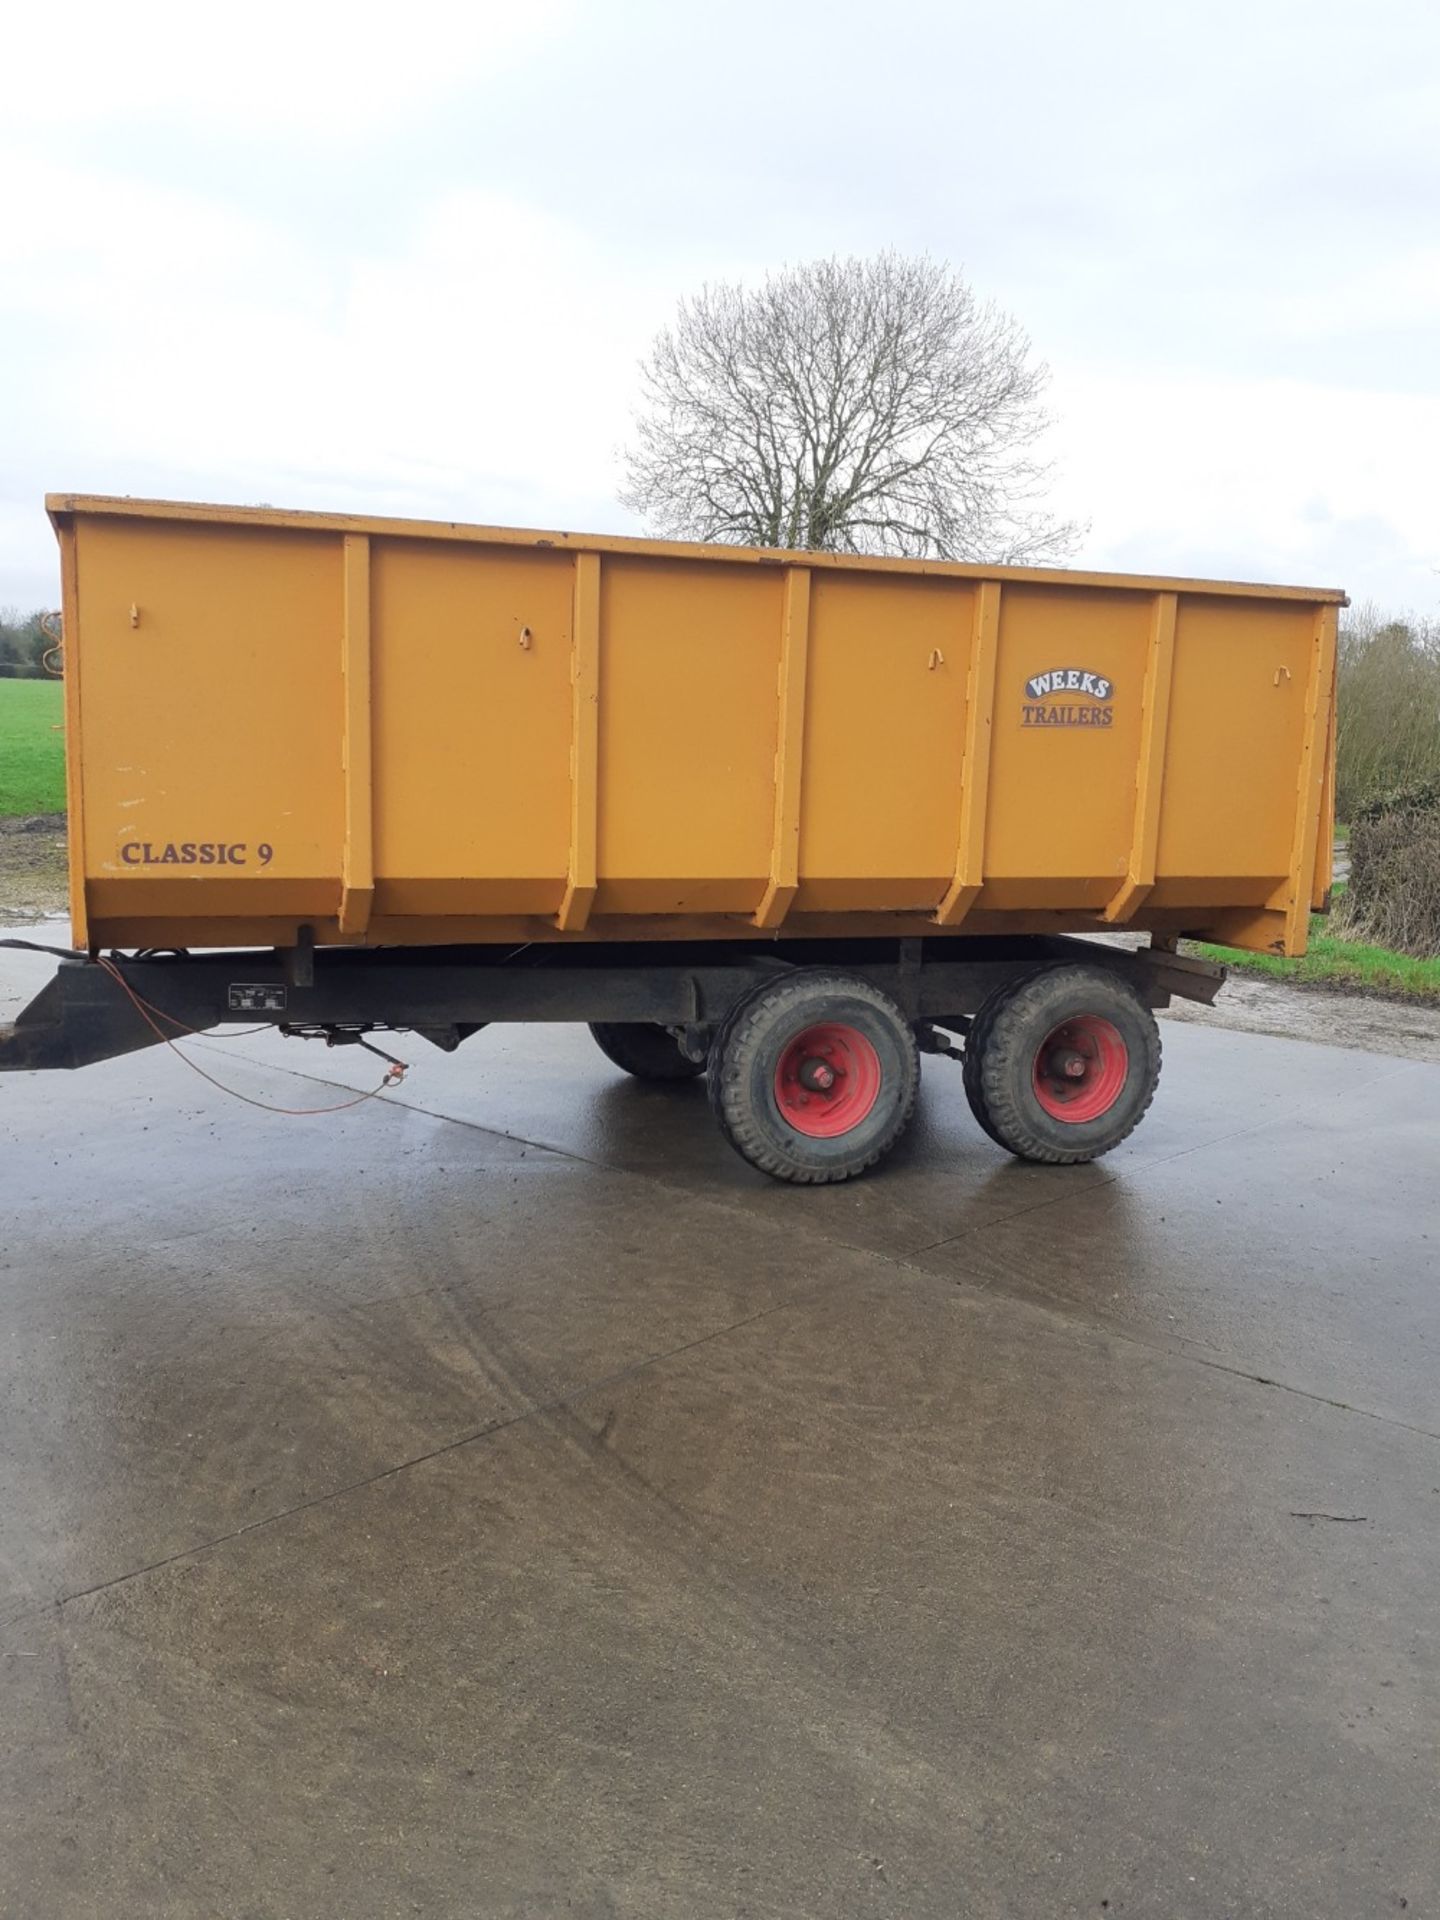 Weekes 9 tonne classic trailer, on our farm since new, - Image 3 of 5